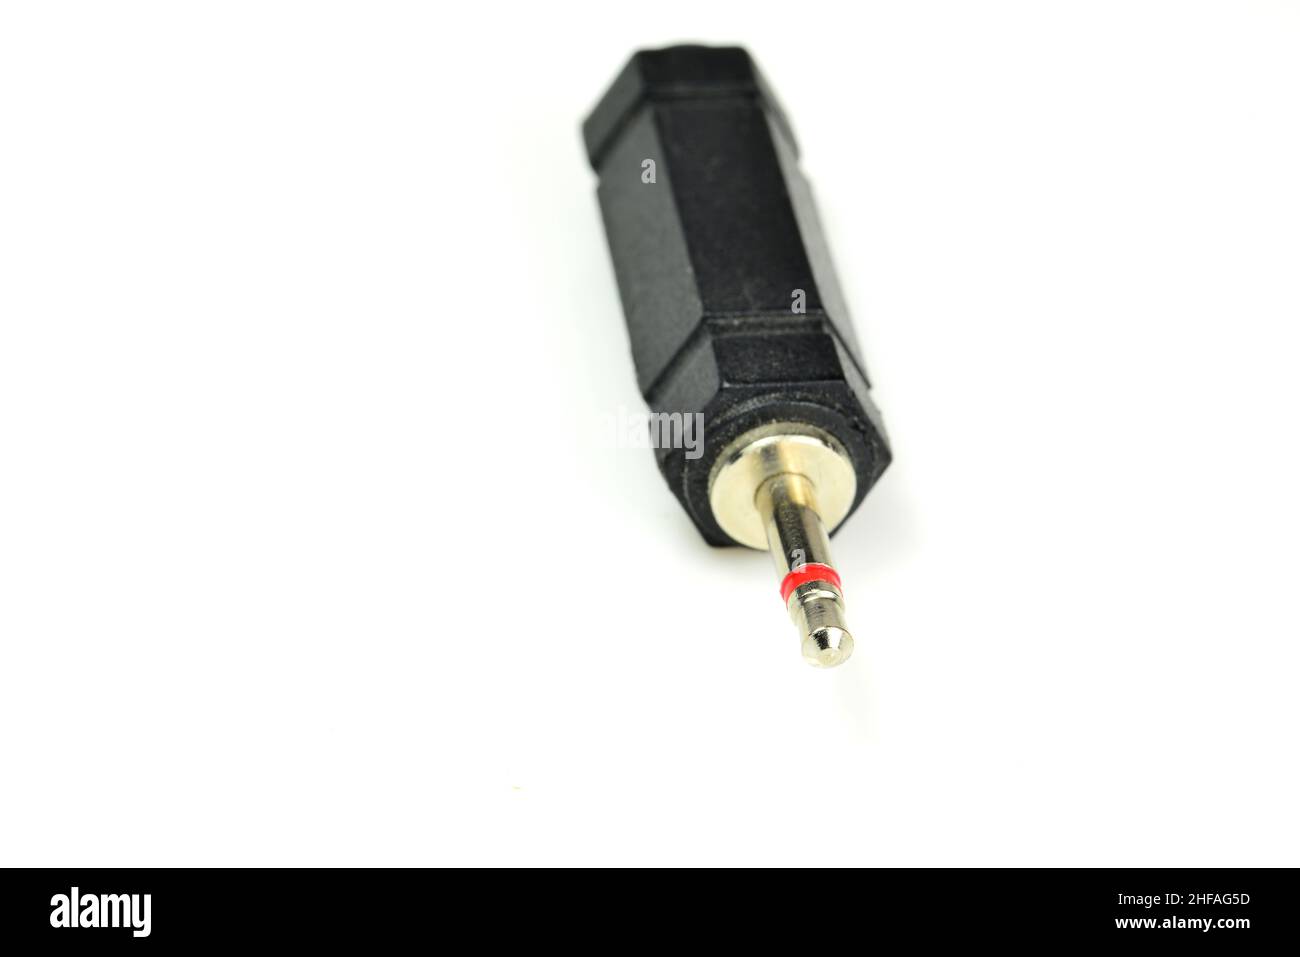 phone jack coupling in a closeup on a white background Stock Photo